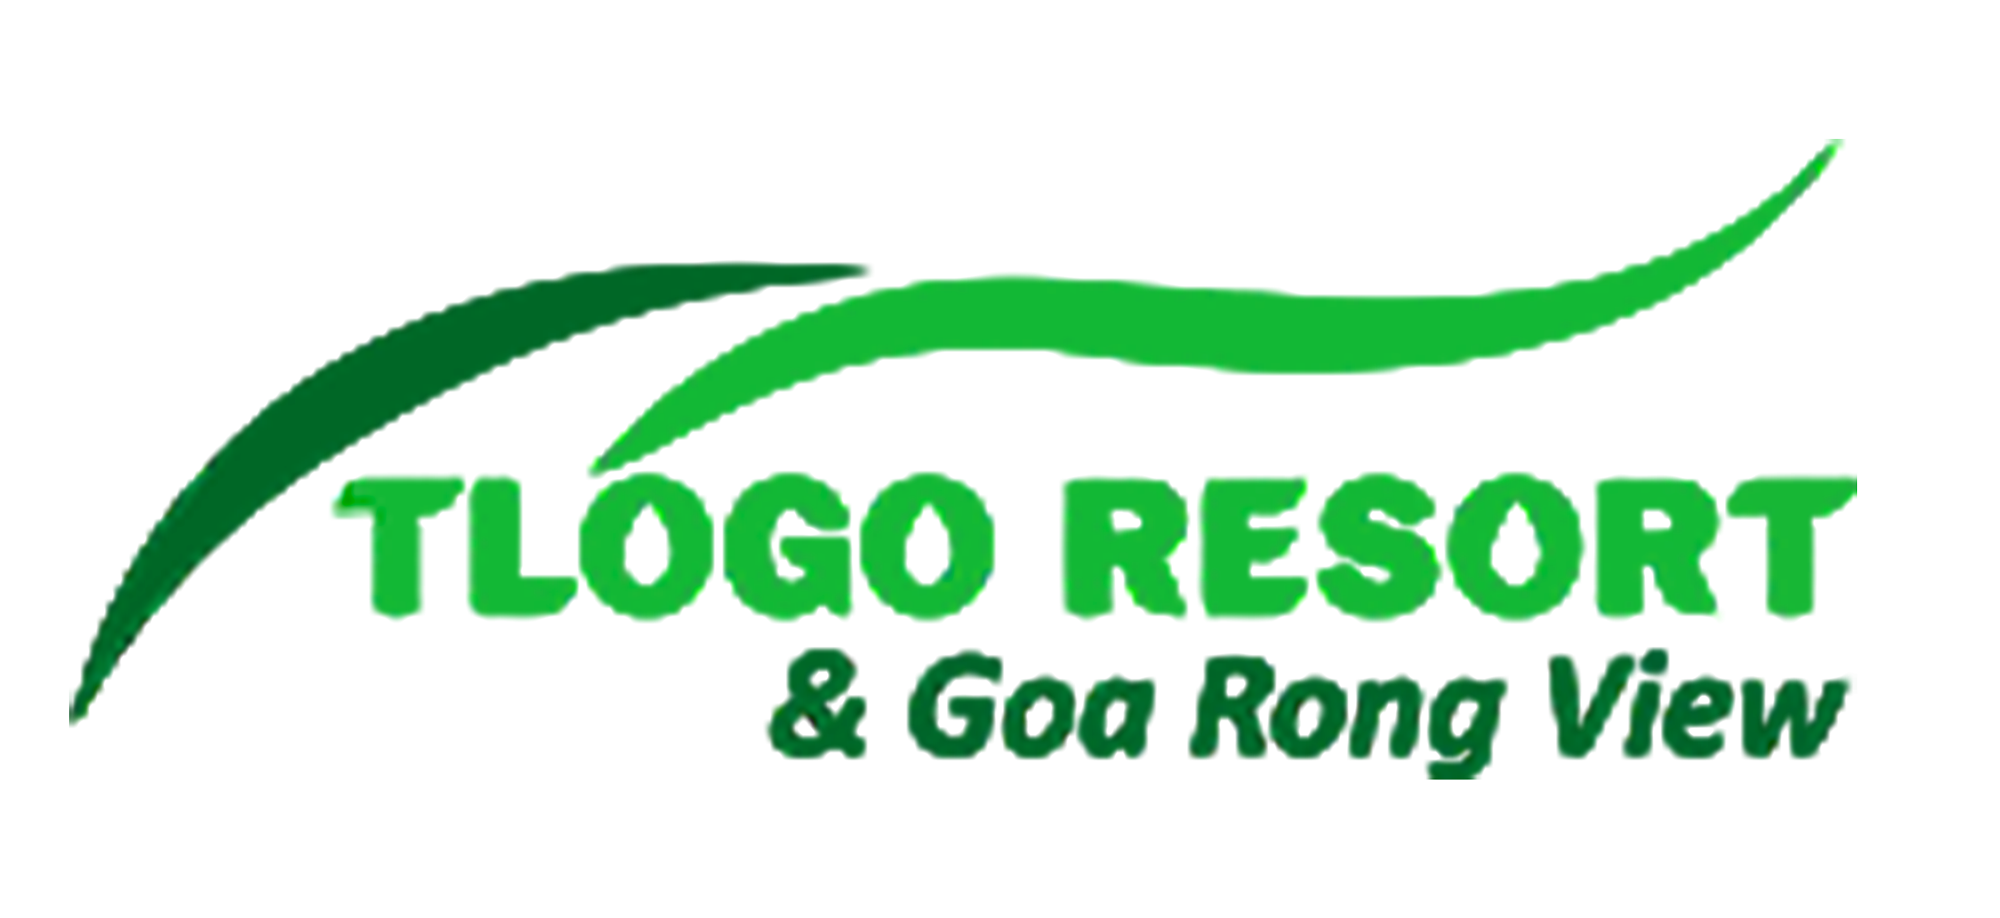 Official Website of Tlogo Resort and Goa Rong View Tuntang, Salatiga, Central Java, Indonesia